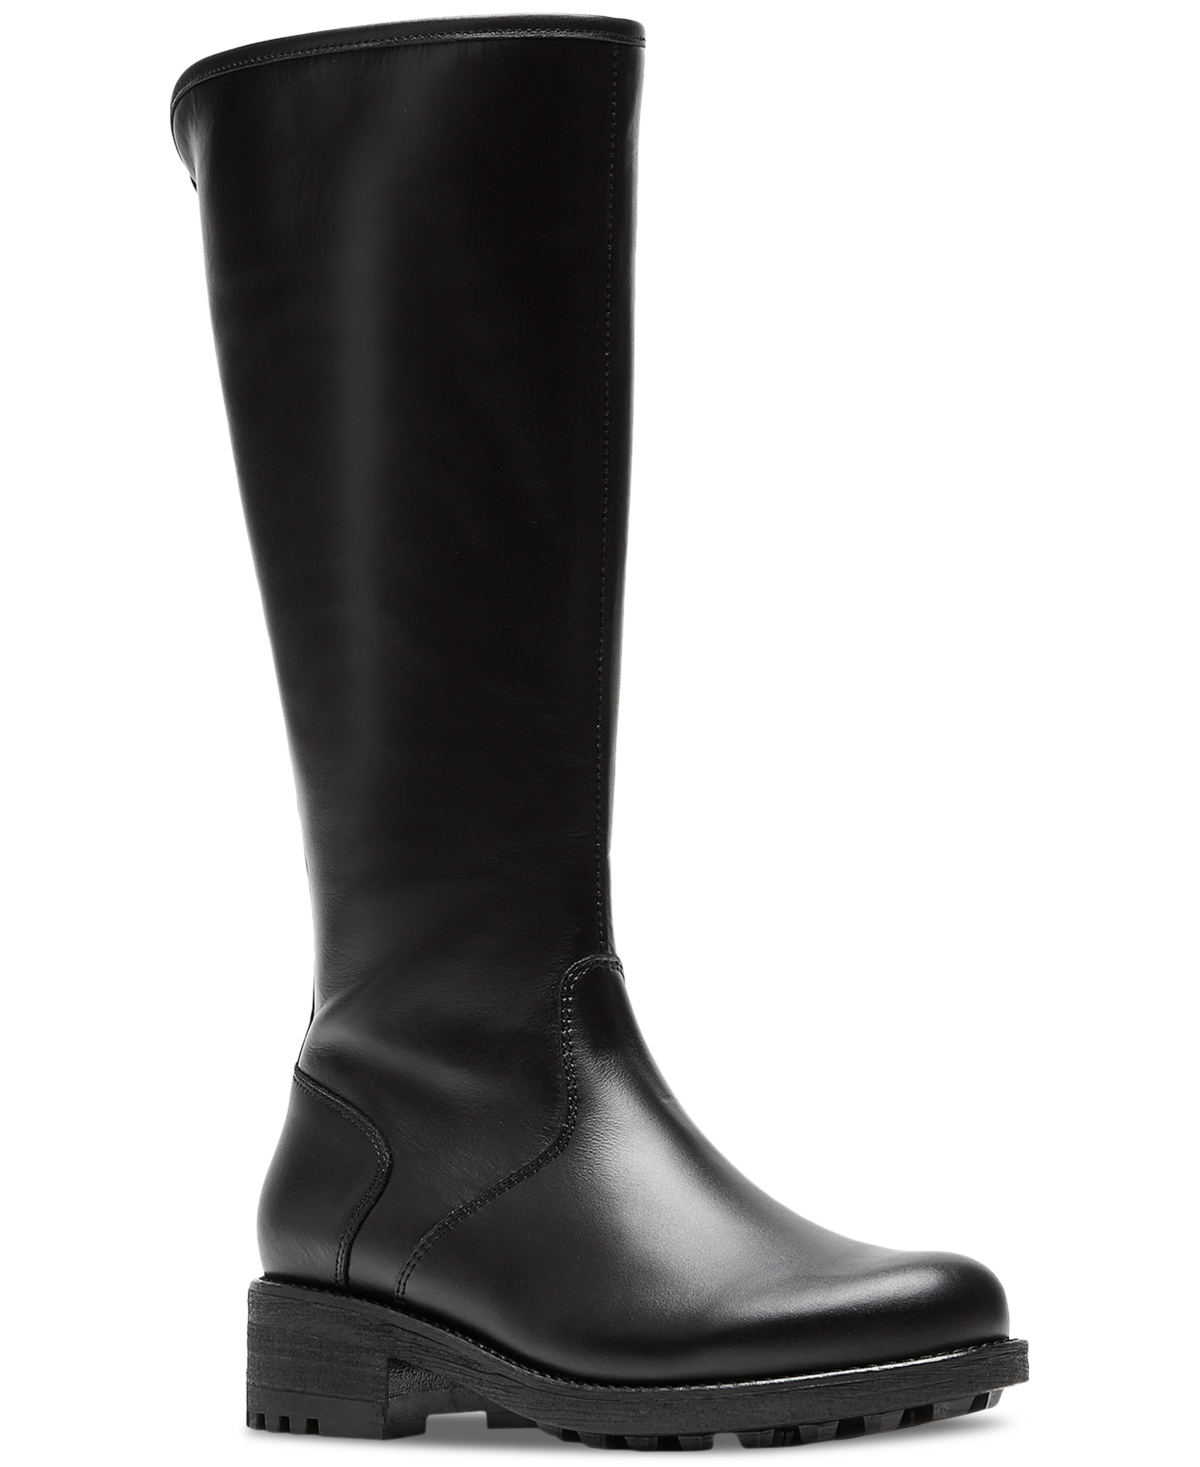 LA CANADIENNE HERITAGE WOMEN'S HUXLEY RIDING BOOTS, CREATED FOR MACY'S